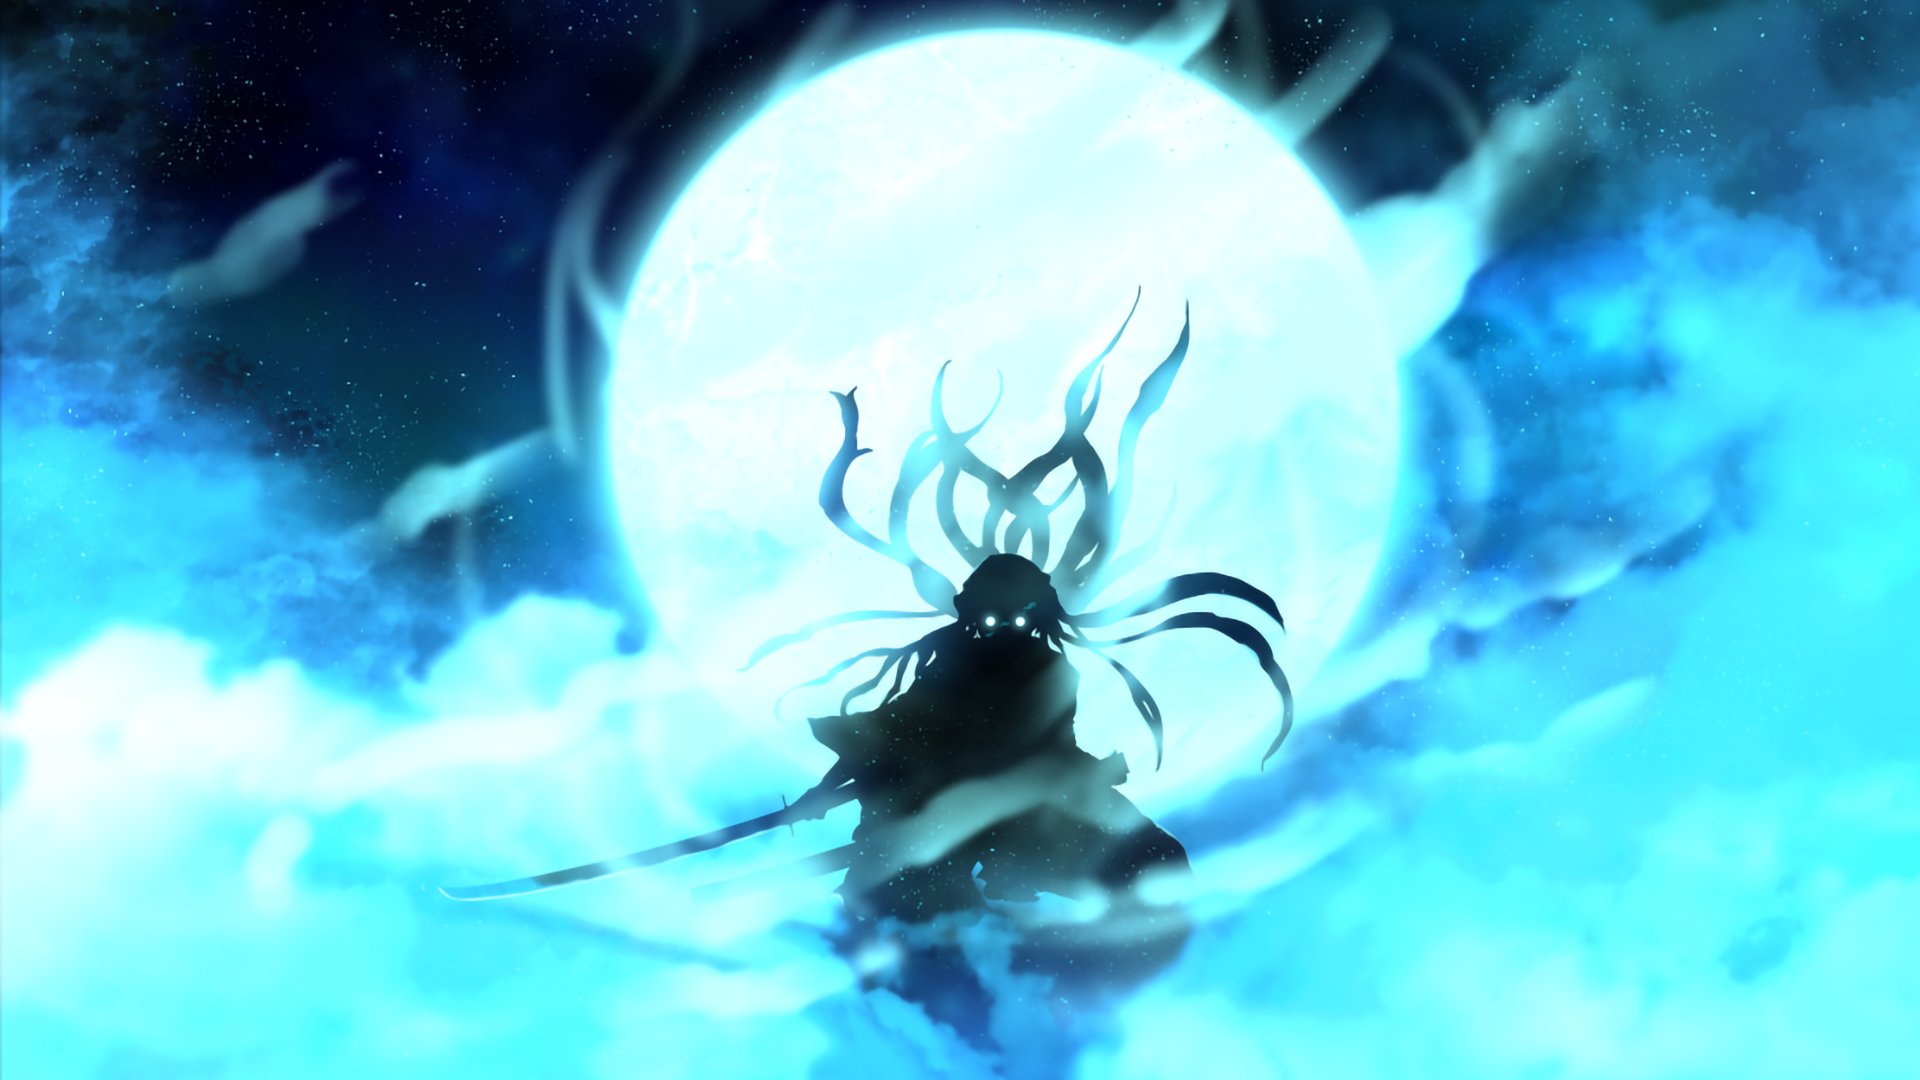 Demon Slayer Long Hair Muichiro Tokito On Back View With Background Of Blue Moon And Dark Sky With Stars HD Anime Wallpaper